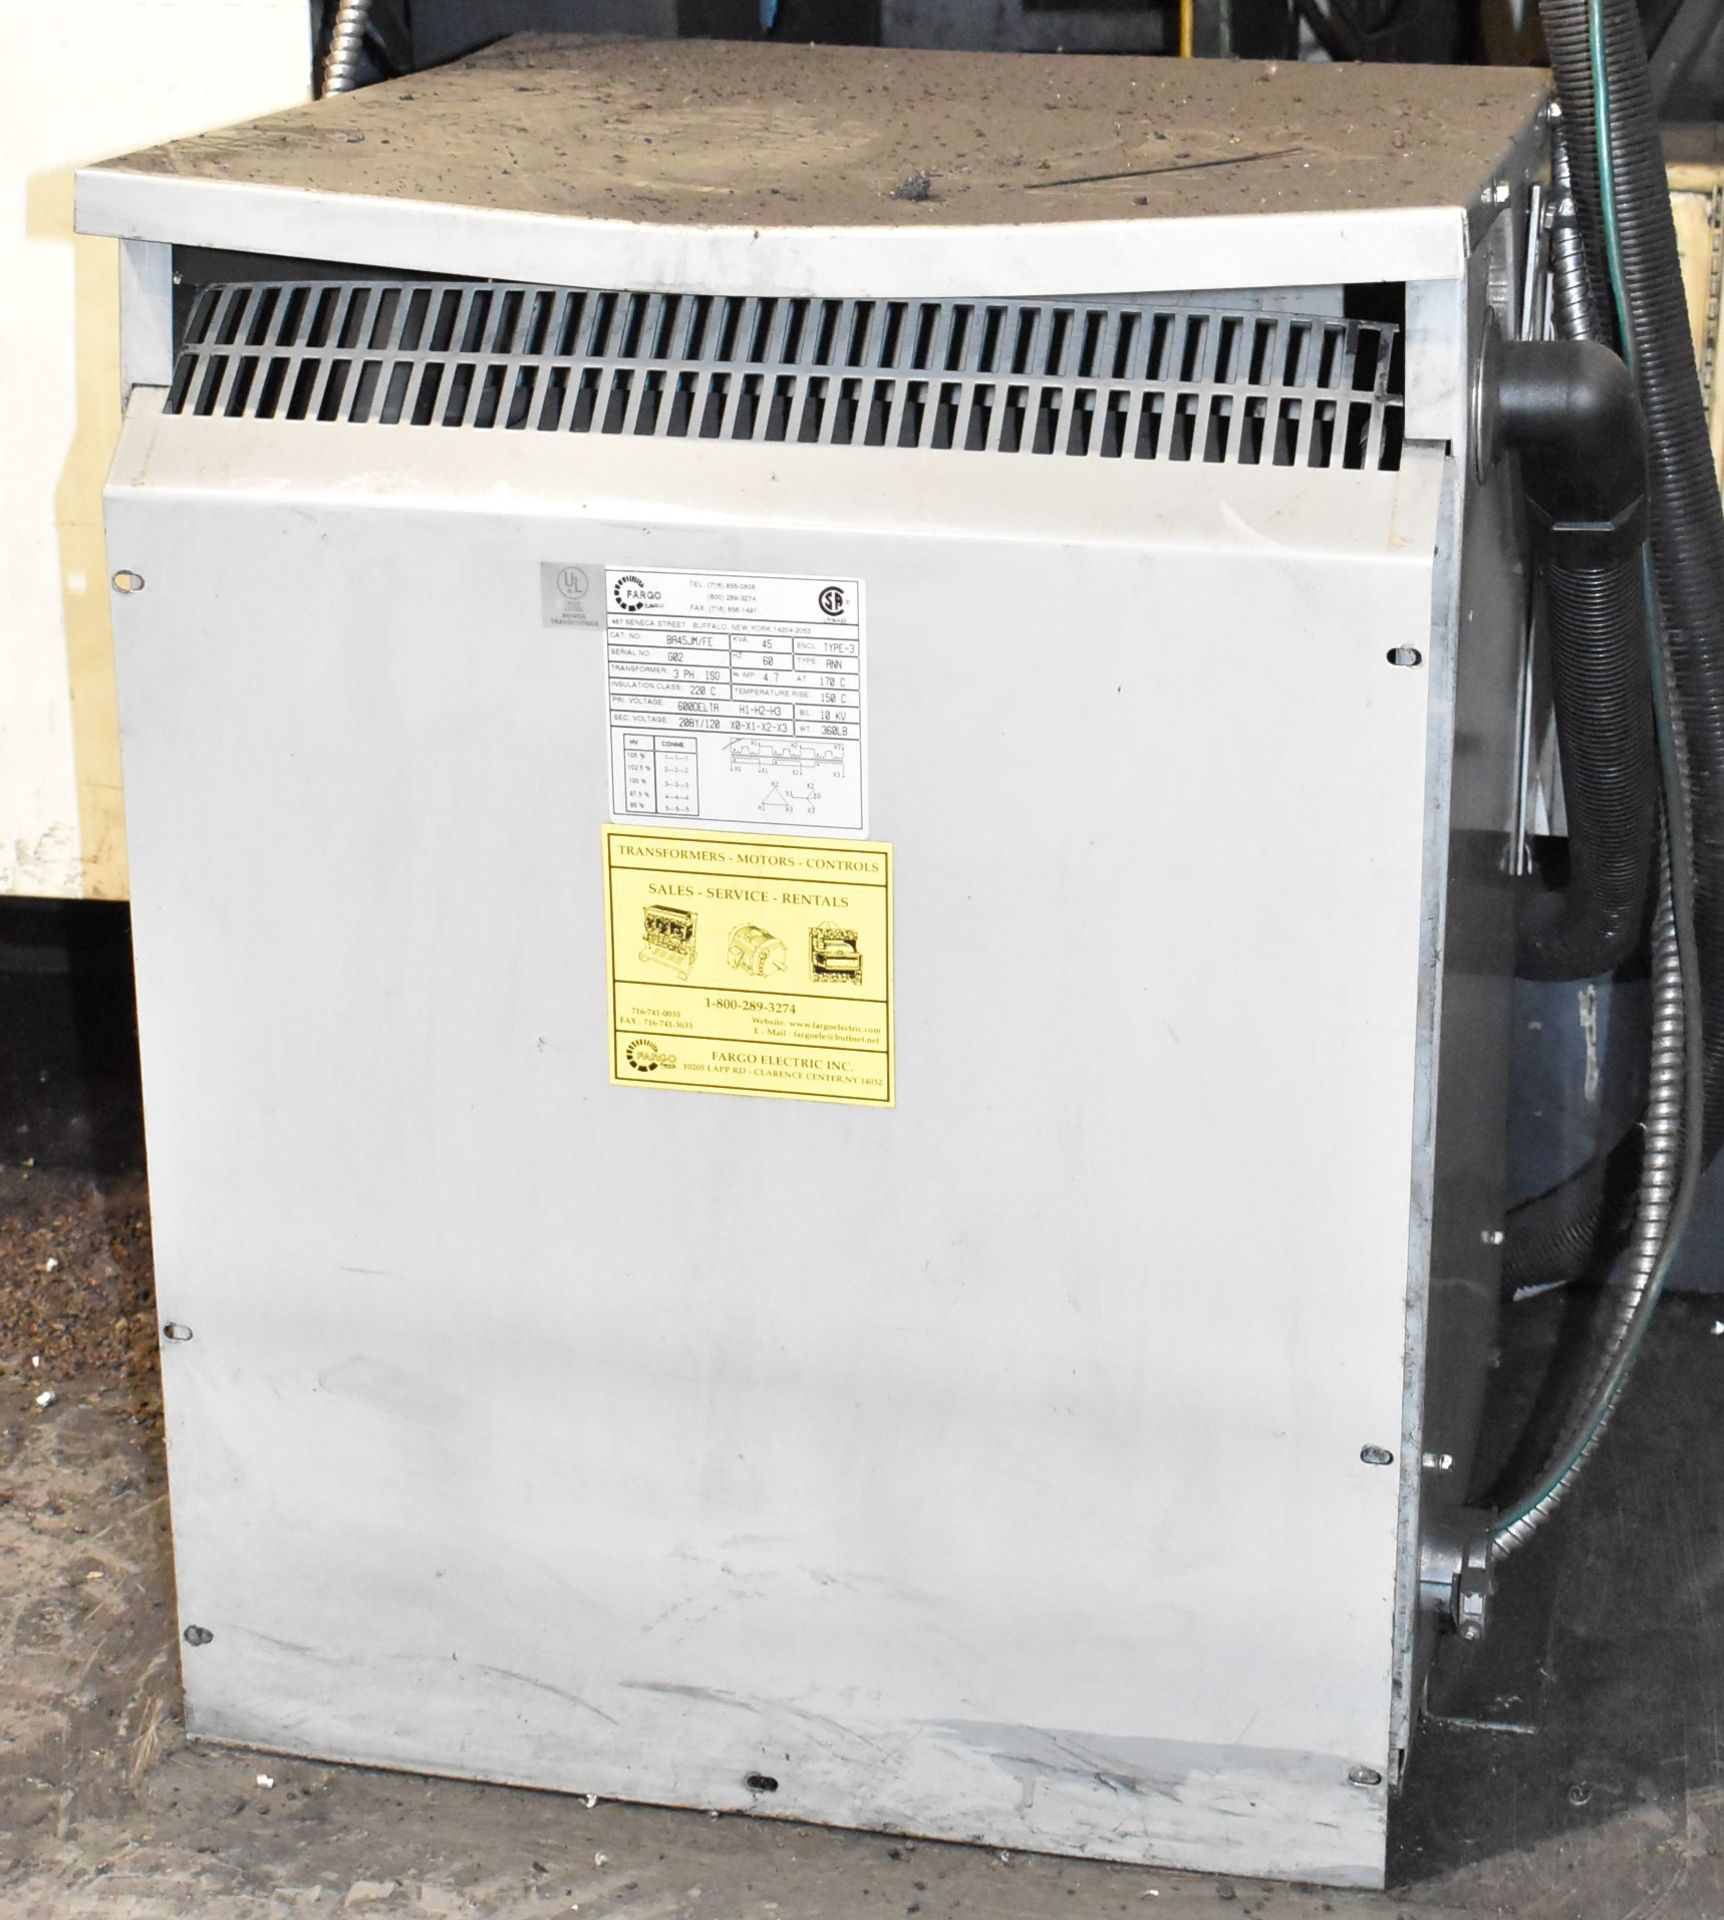 FARGO 45 KVA TRANSFORMER, 600-208-120V/3PH/60HZ, S/N G02 (CI) (LOCATED AT 11555 COUNTY ROAD 42 SUITE